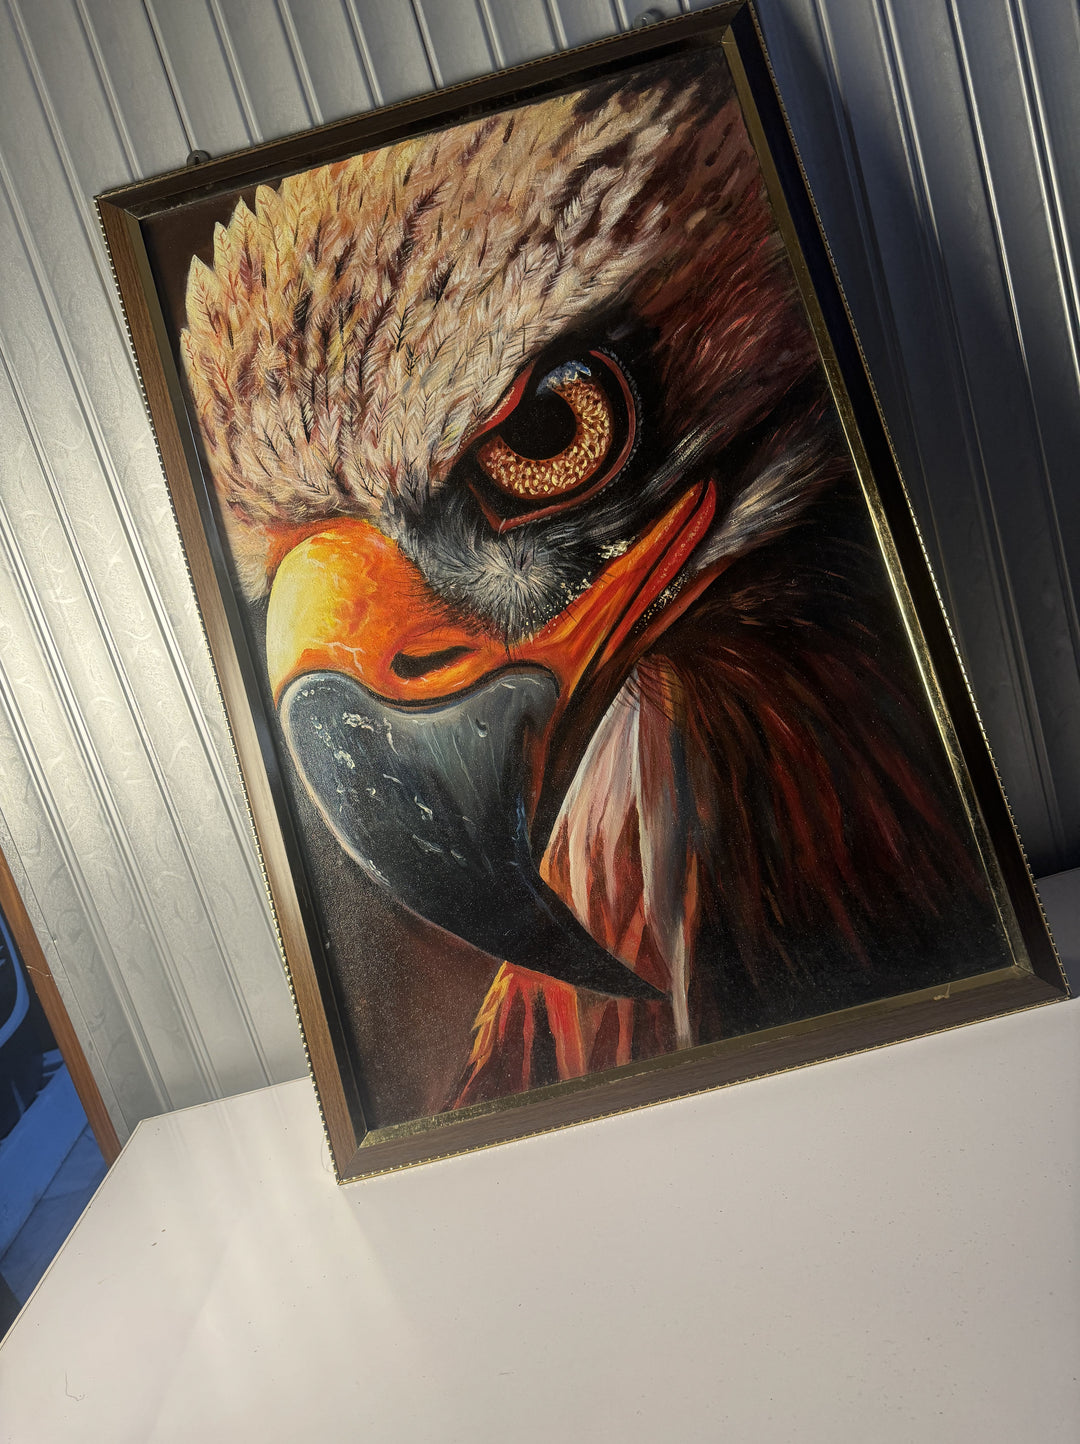 Majestic Eagle Close-Up Oil Painting | Eagle Fine Art oil pastel drawing | Handmade Wall Art | Unique Home Decor | by Muslim Sadiq